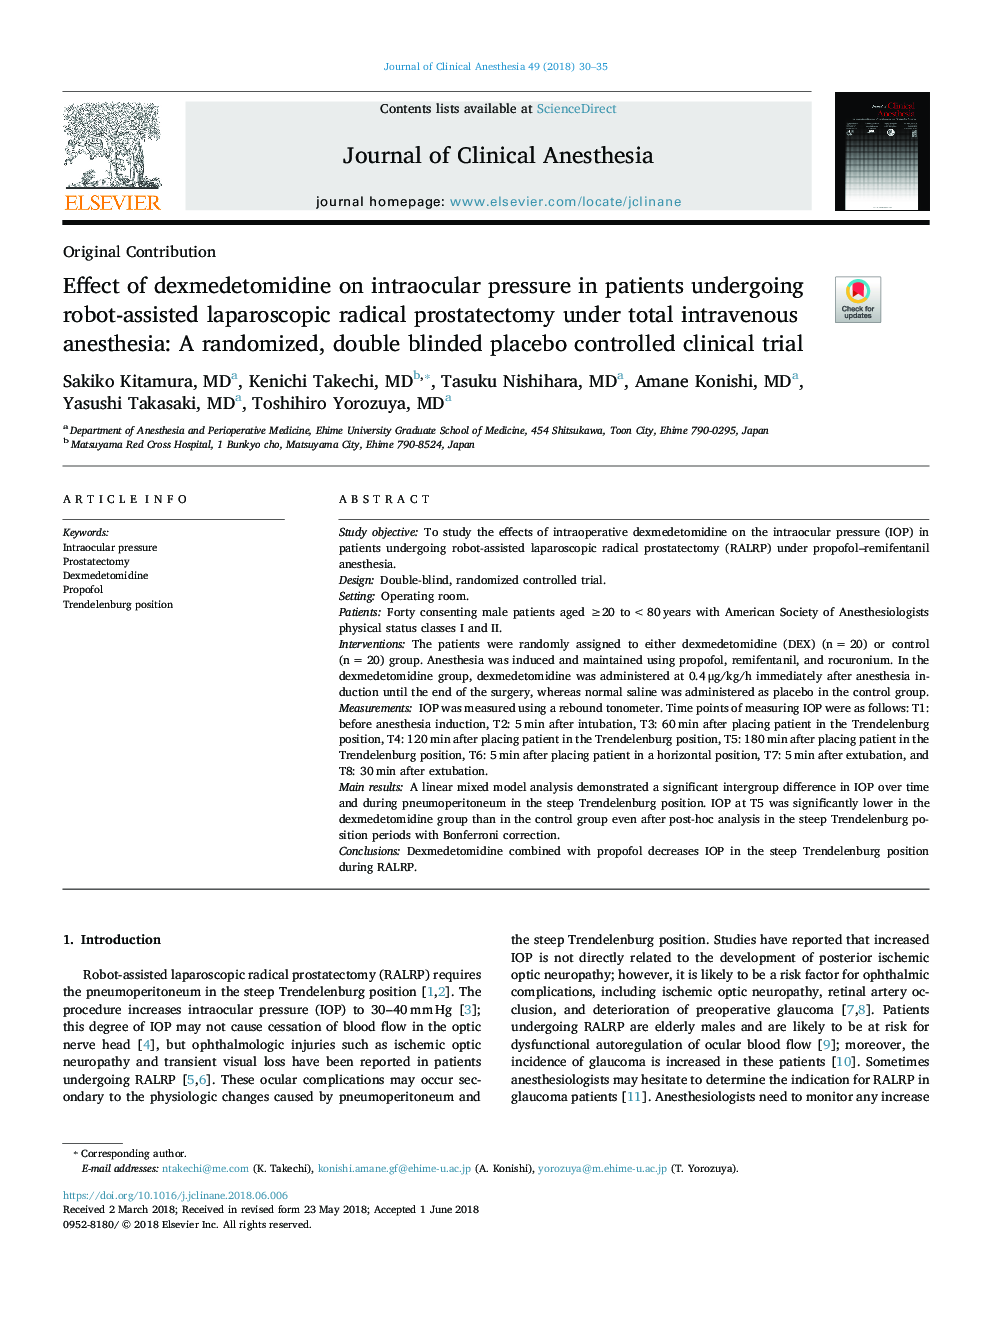 Effect of dexmedetomidine on intraocular pressure in patients undergoing robot-assisted laparoscopic radical prostatectomy under total intravenous anesthesia: A randomized, double blinded placebo controlled clinical trial